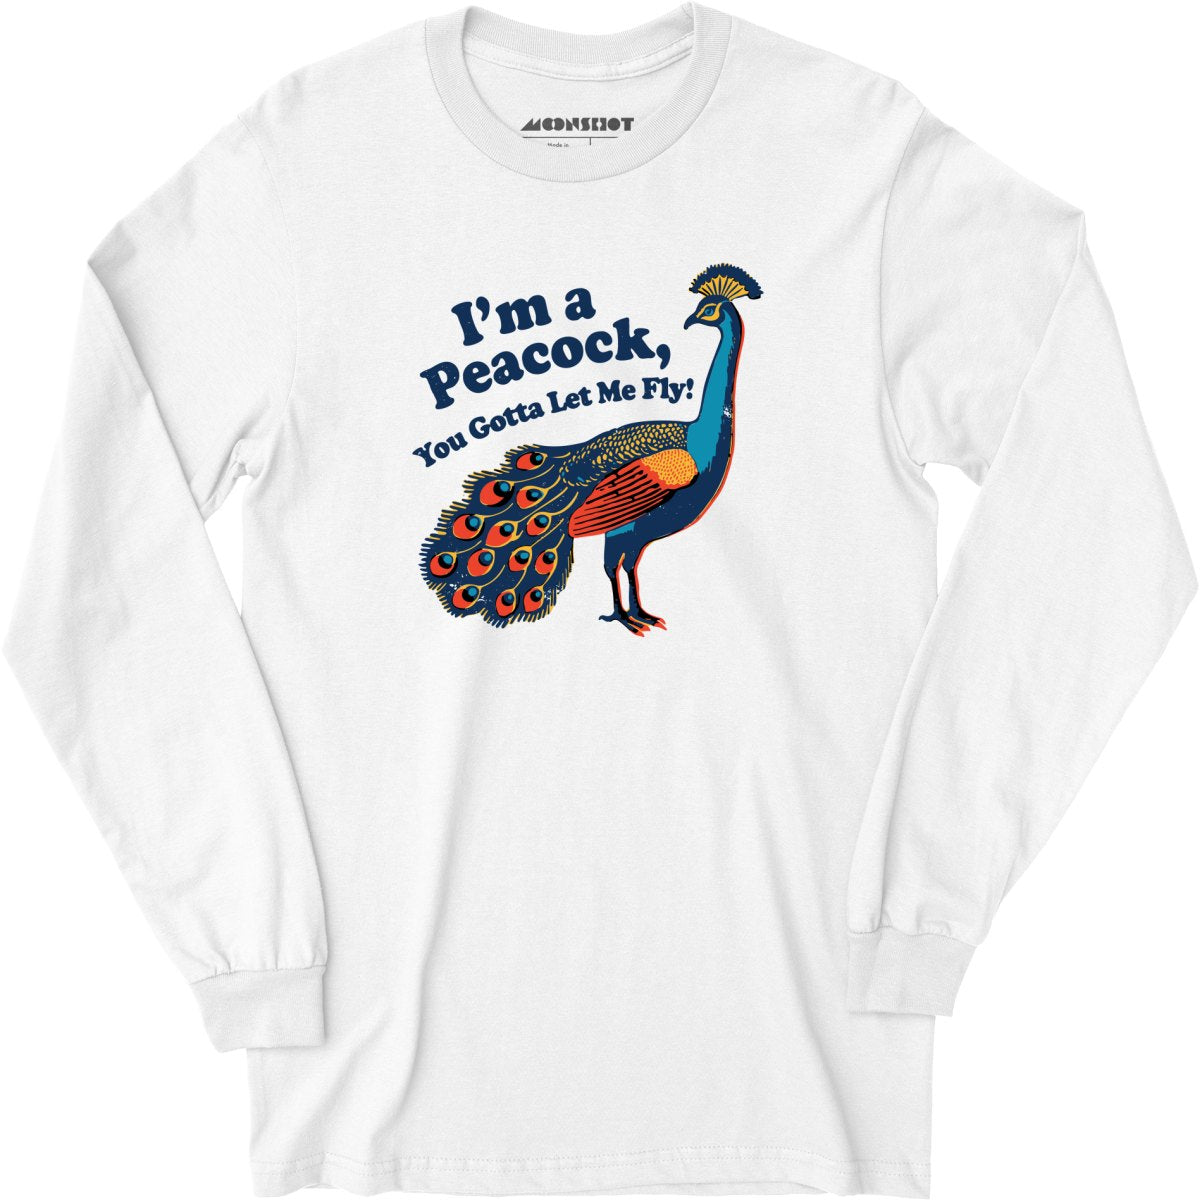 I'm a Peacock You Gotta Let Me Fly - Long Sleeve T-Shirt